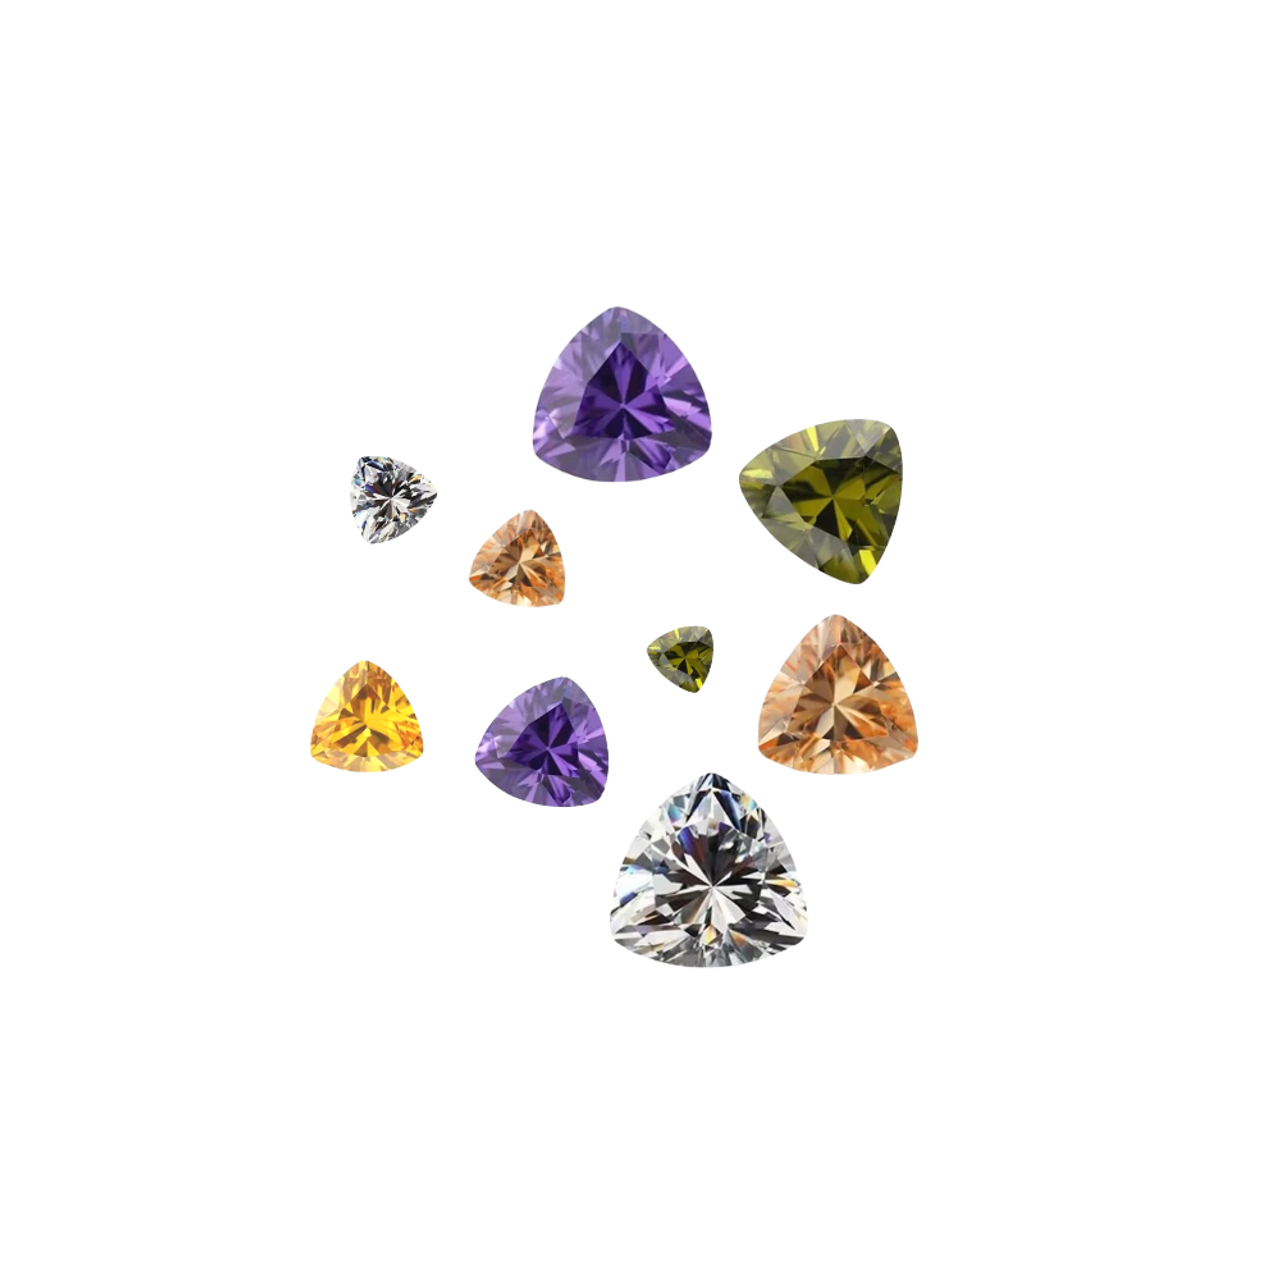 Lab Created Gempack - Trillion Mixed Sizes and Shapes (12 stones)